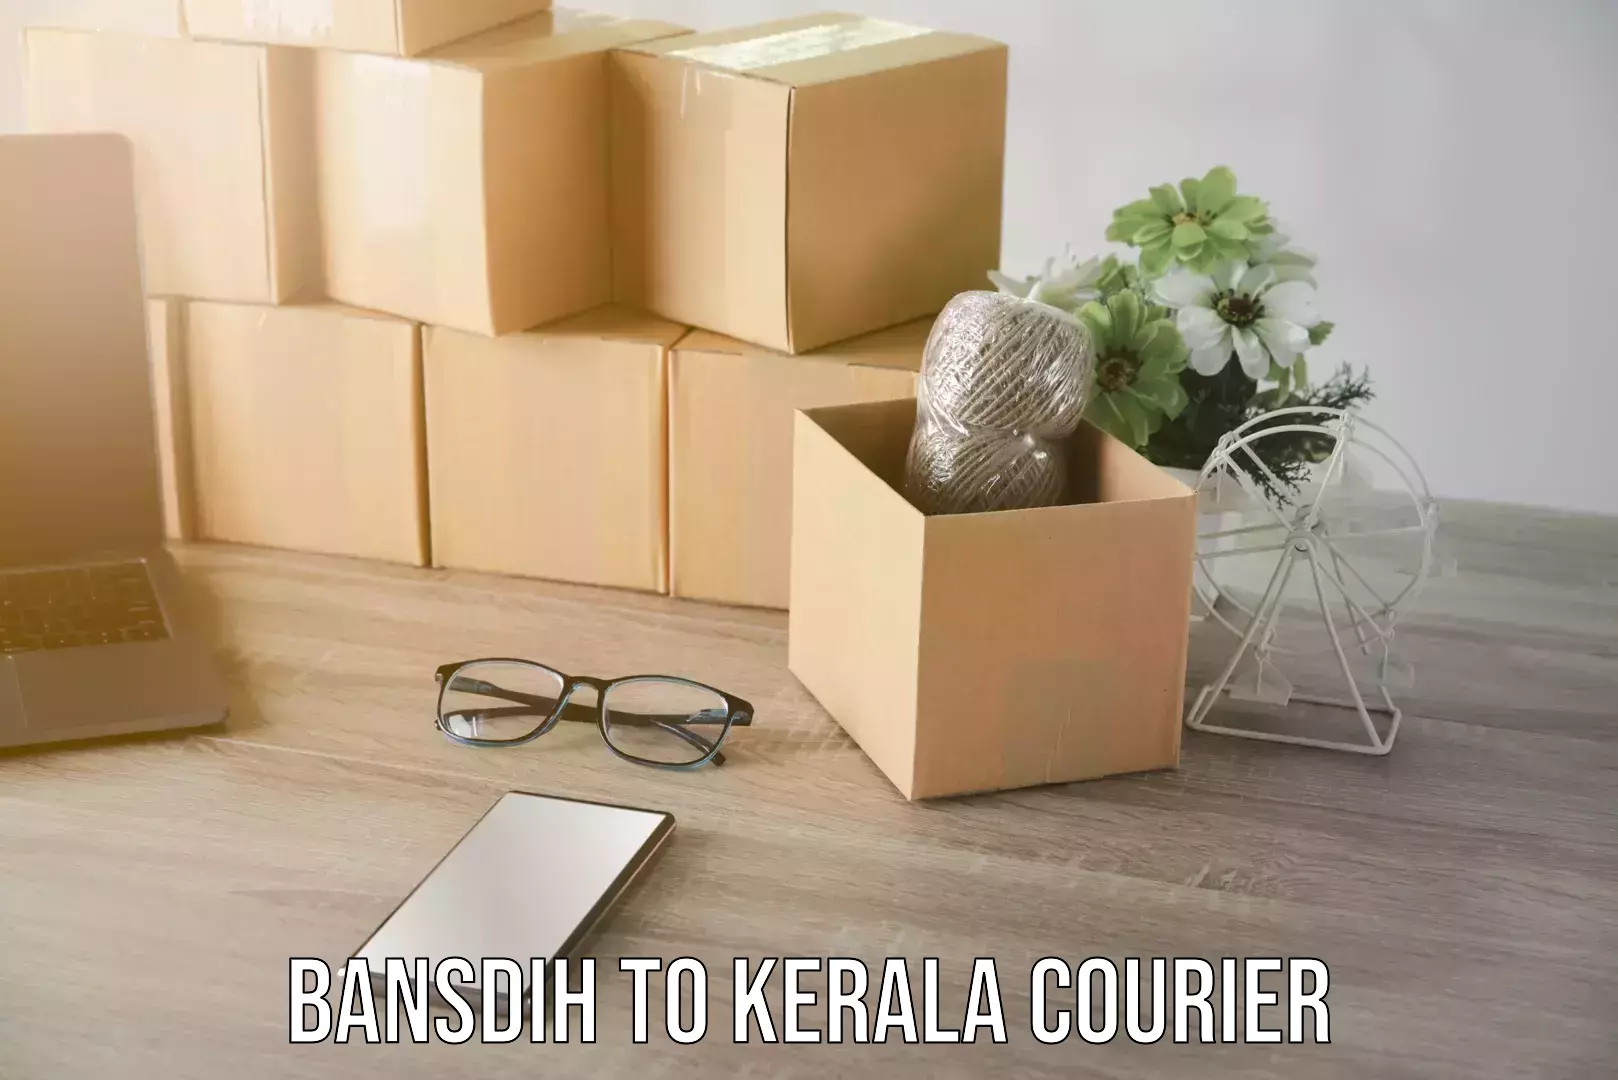 24-hour courier services in Bansdih to Kerala